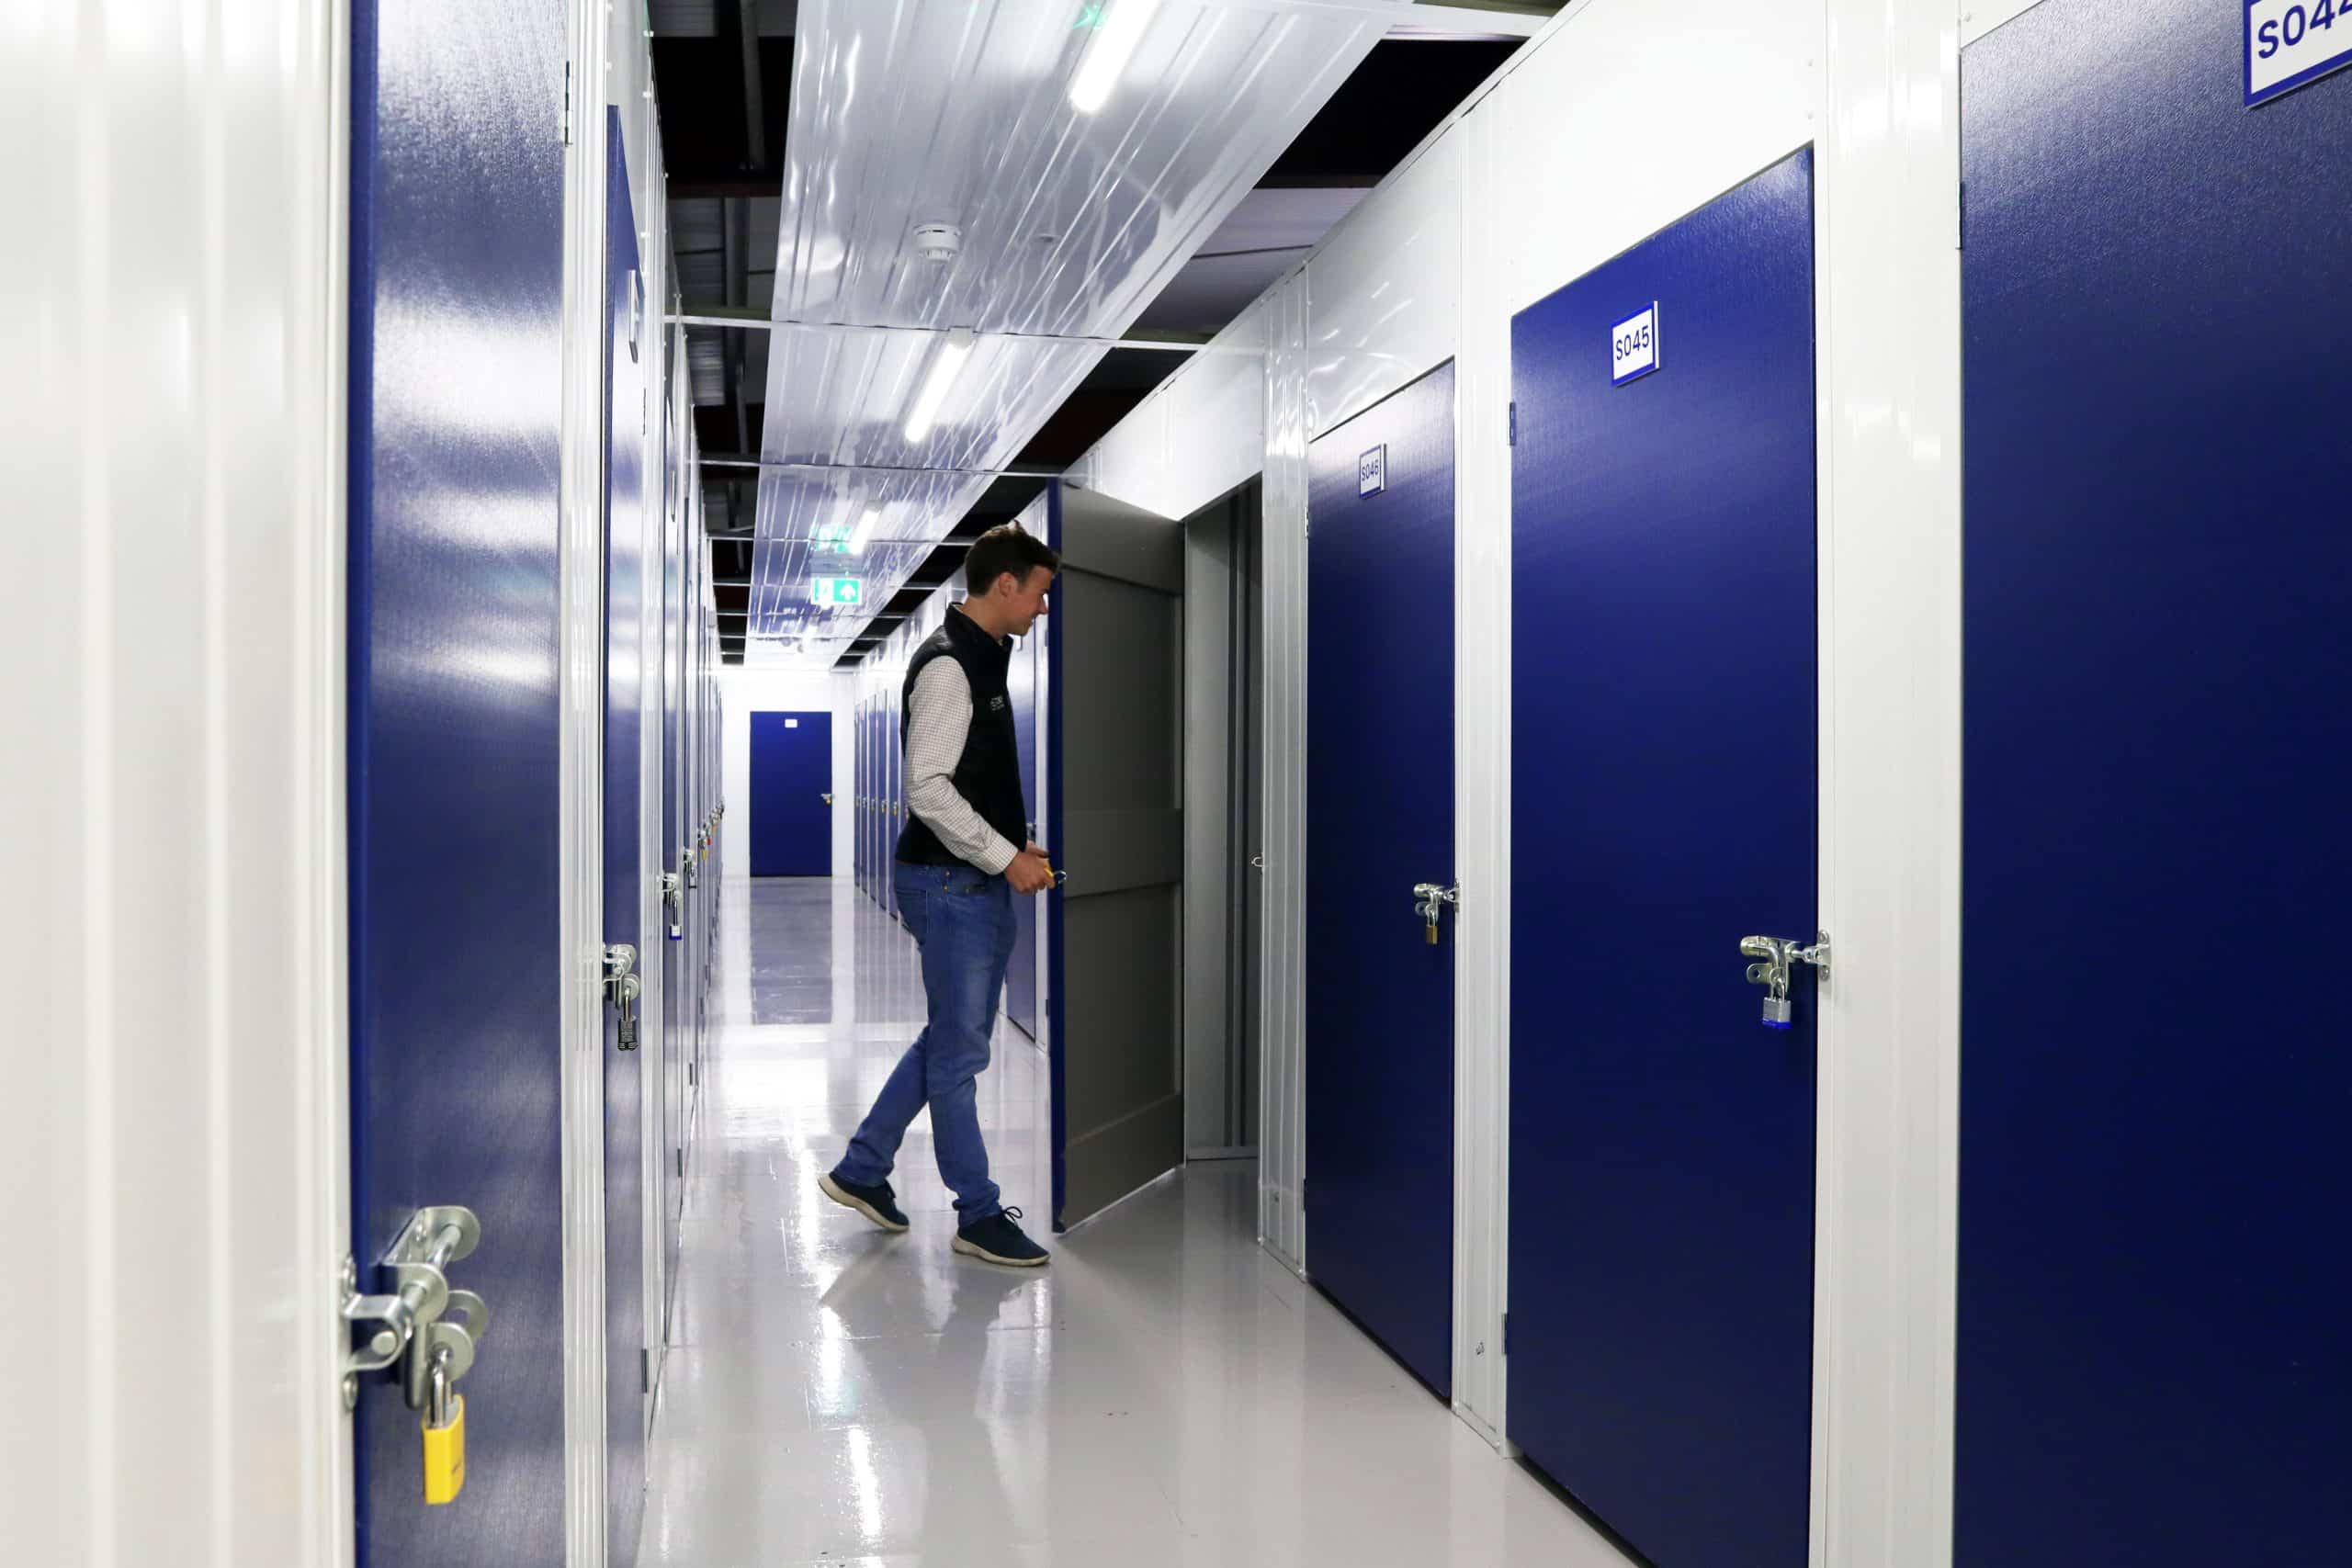 Hectic London Life: Our self storage near Edmonton will bring some peace. Image shows a man opening up a storage unit and a corridor with storage units on both sides.